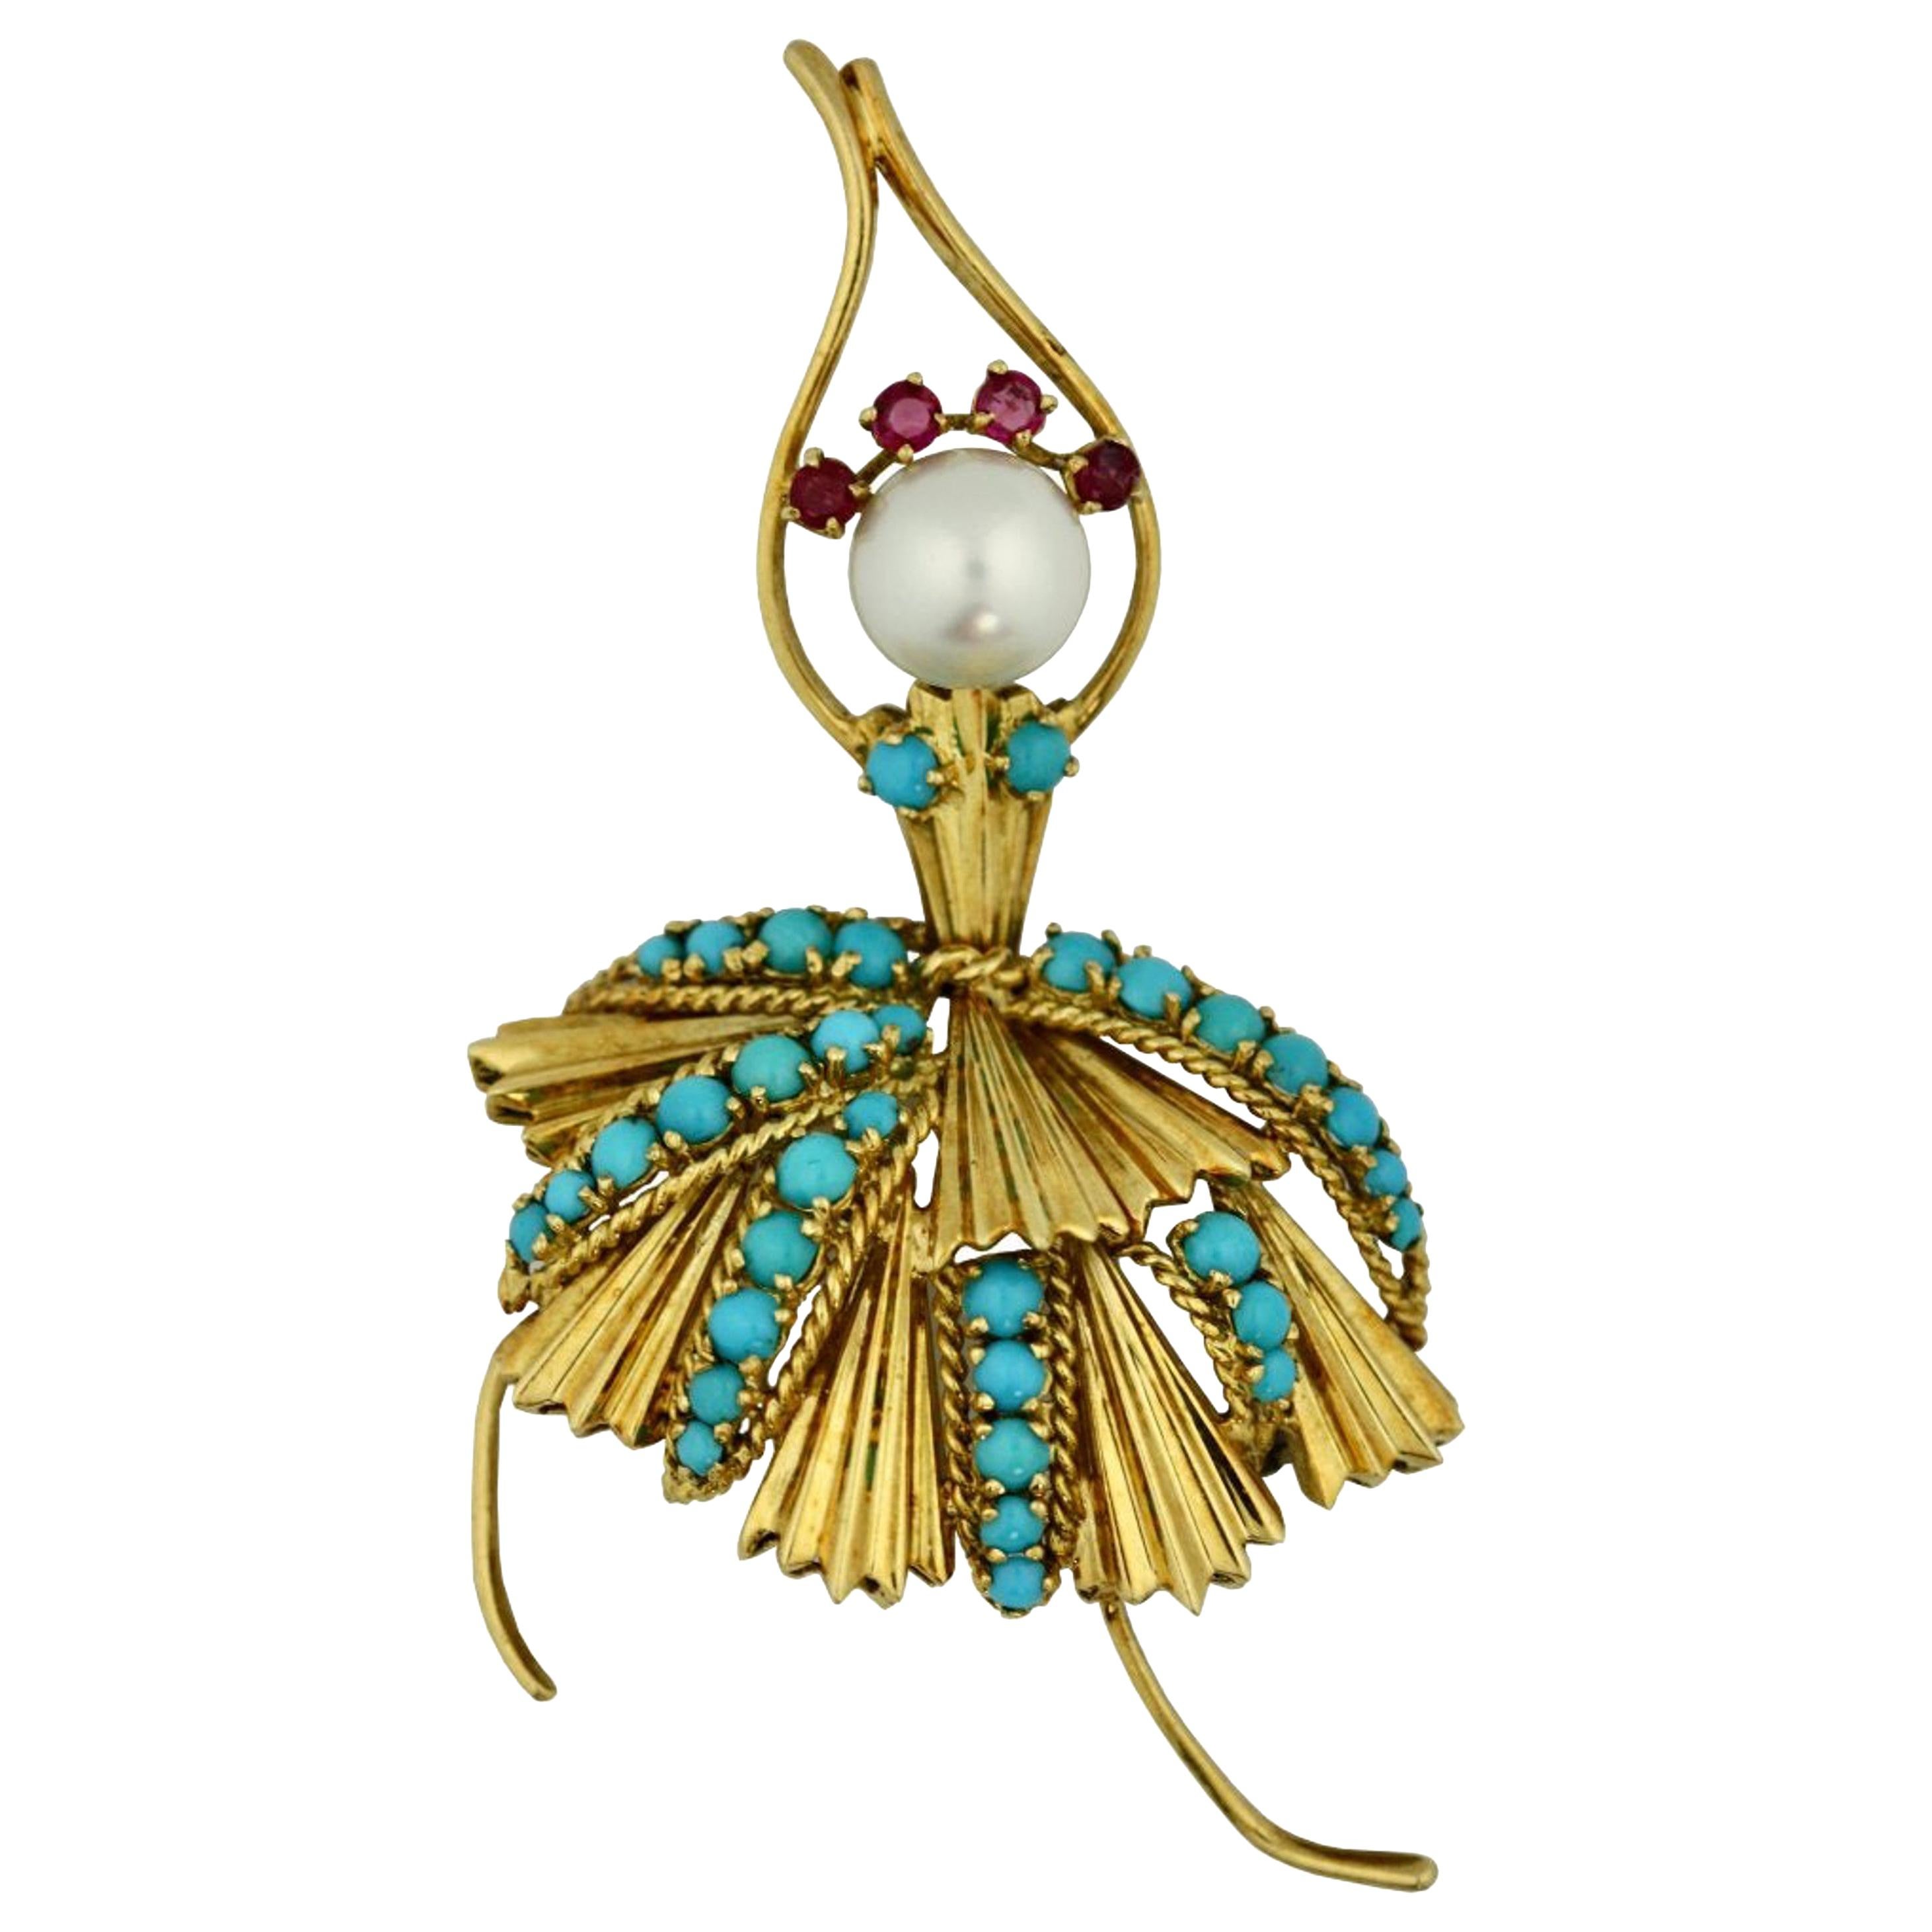 Spritzer & Fuhrmann Turquoise and Pearl Ballerina Brooch